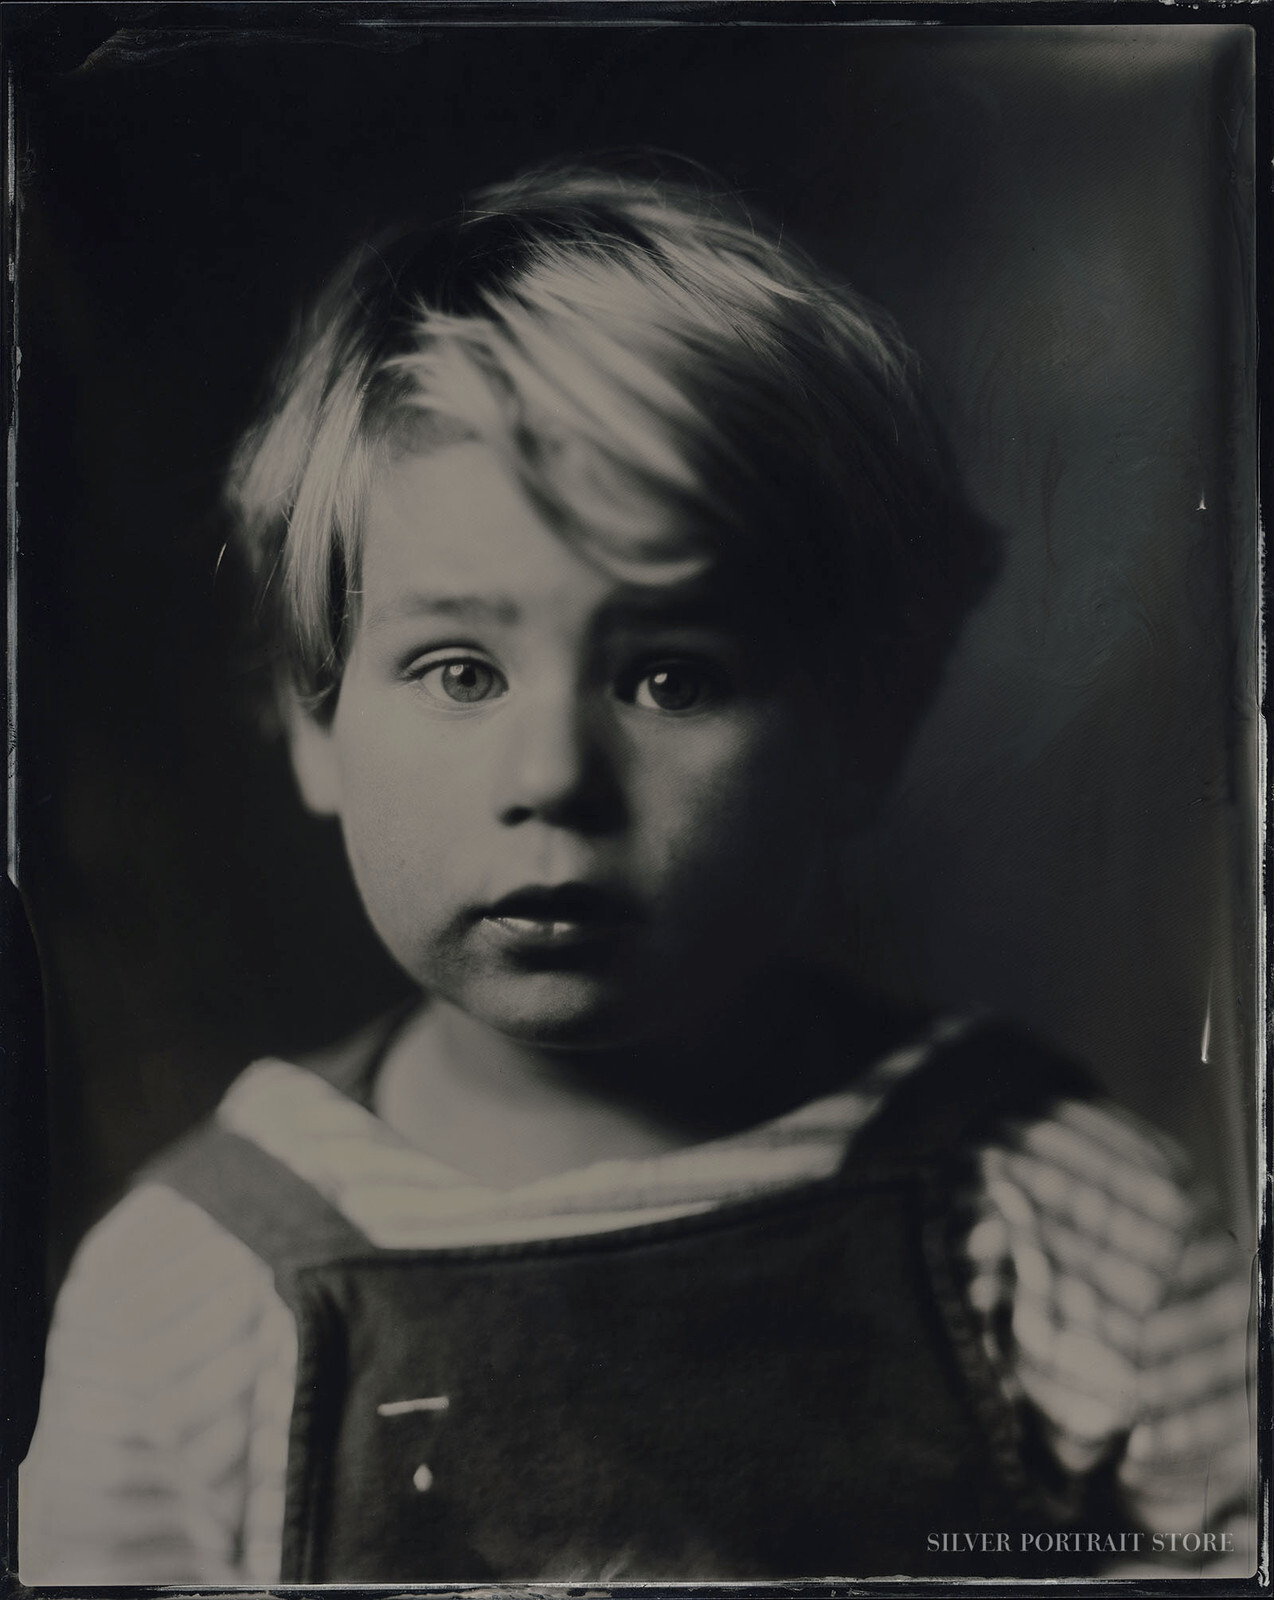 Hugo-Silver Portrait Store-scan from Wet plate collodion-Tintype 20 x 25 cm.